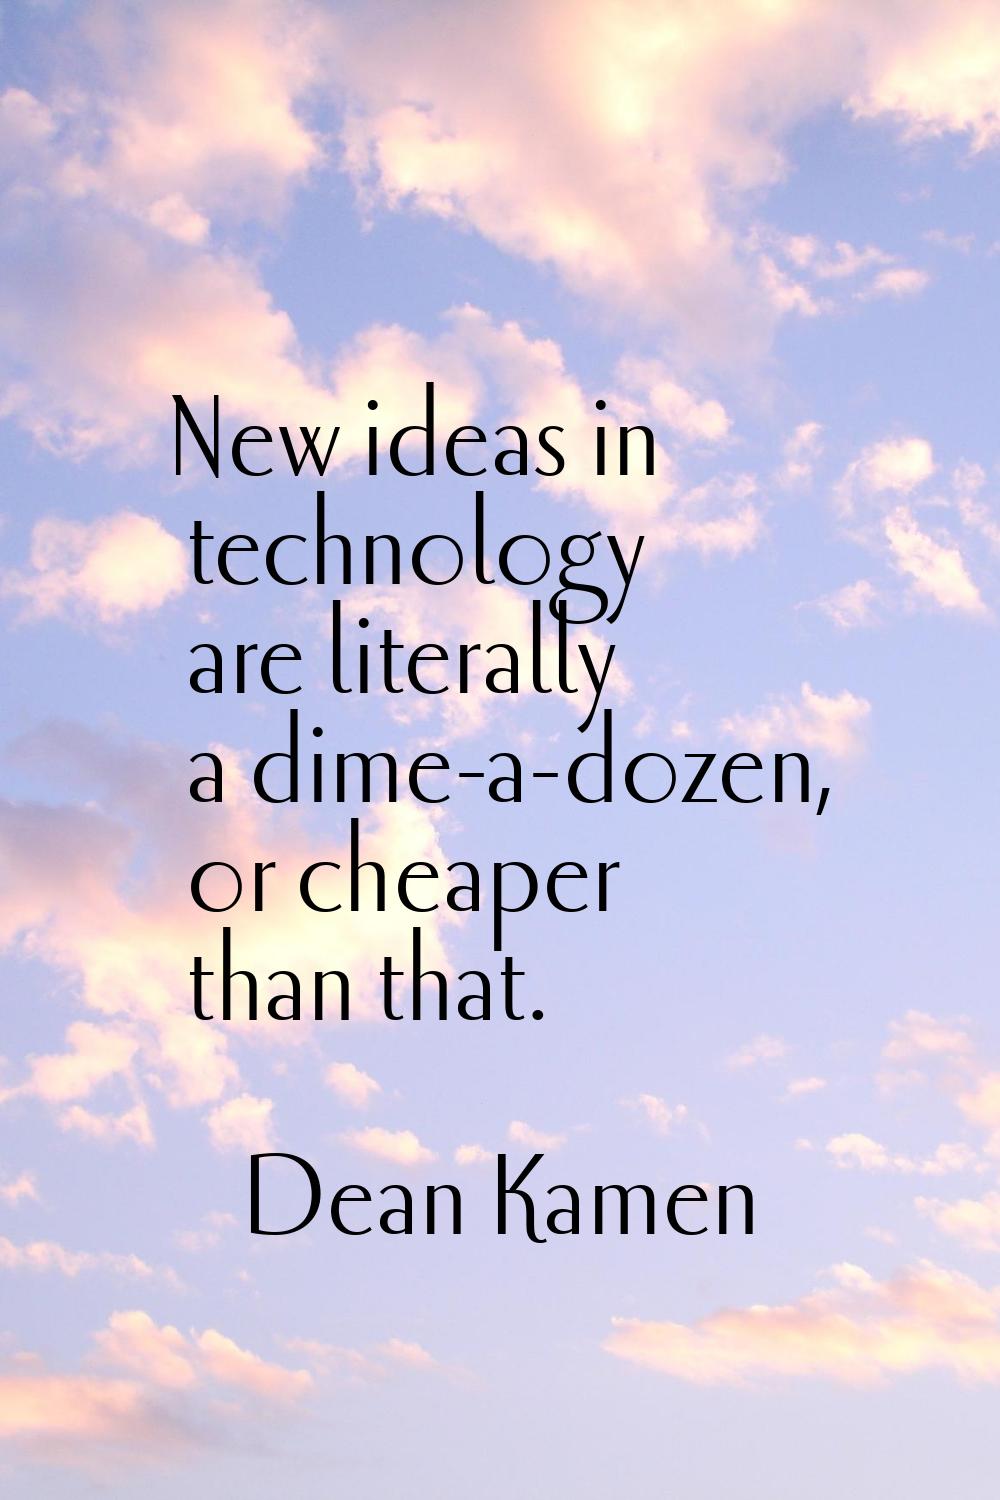 New ideas in technology are literally a dime-a-dozen, or cheaper than that.